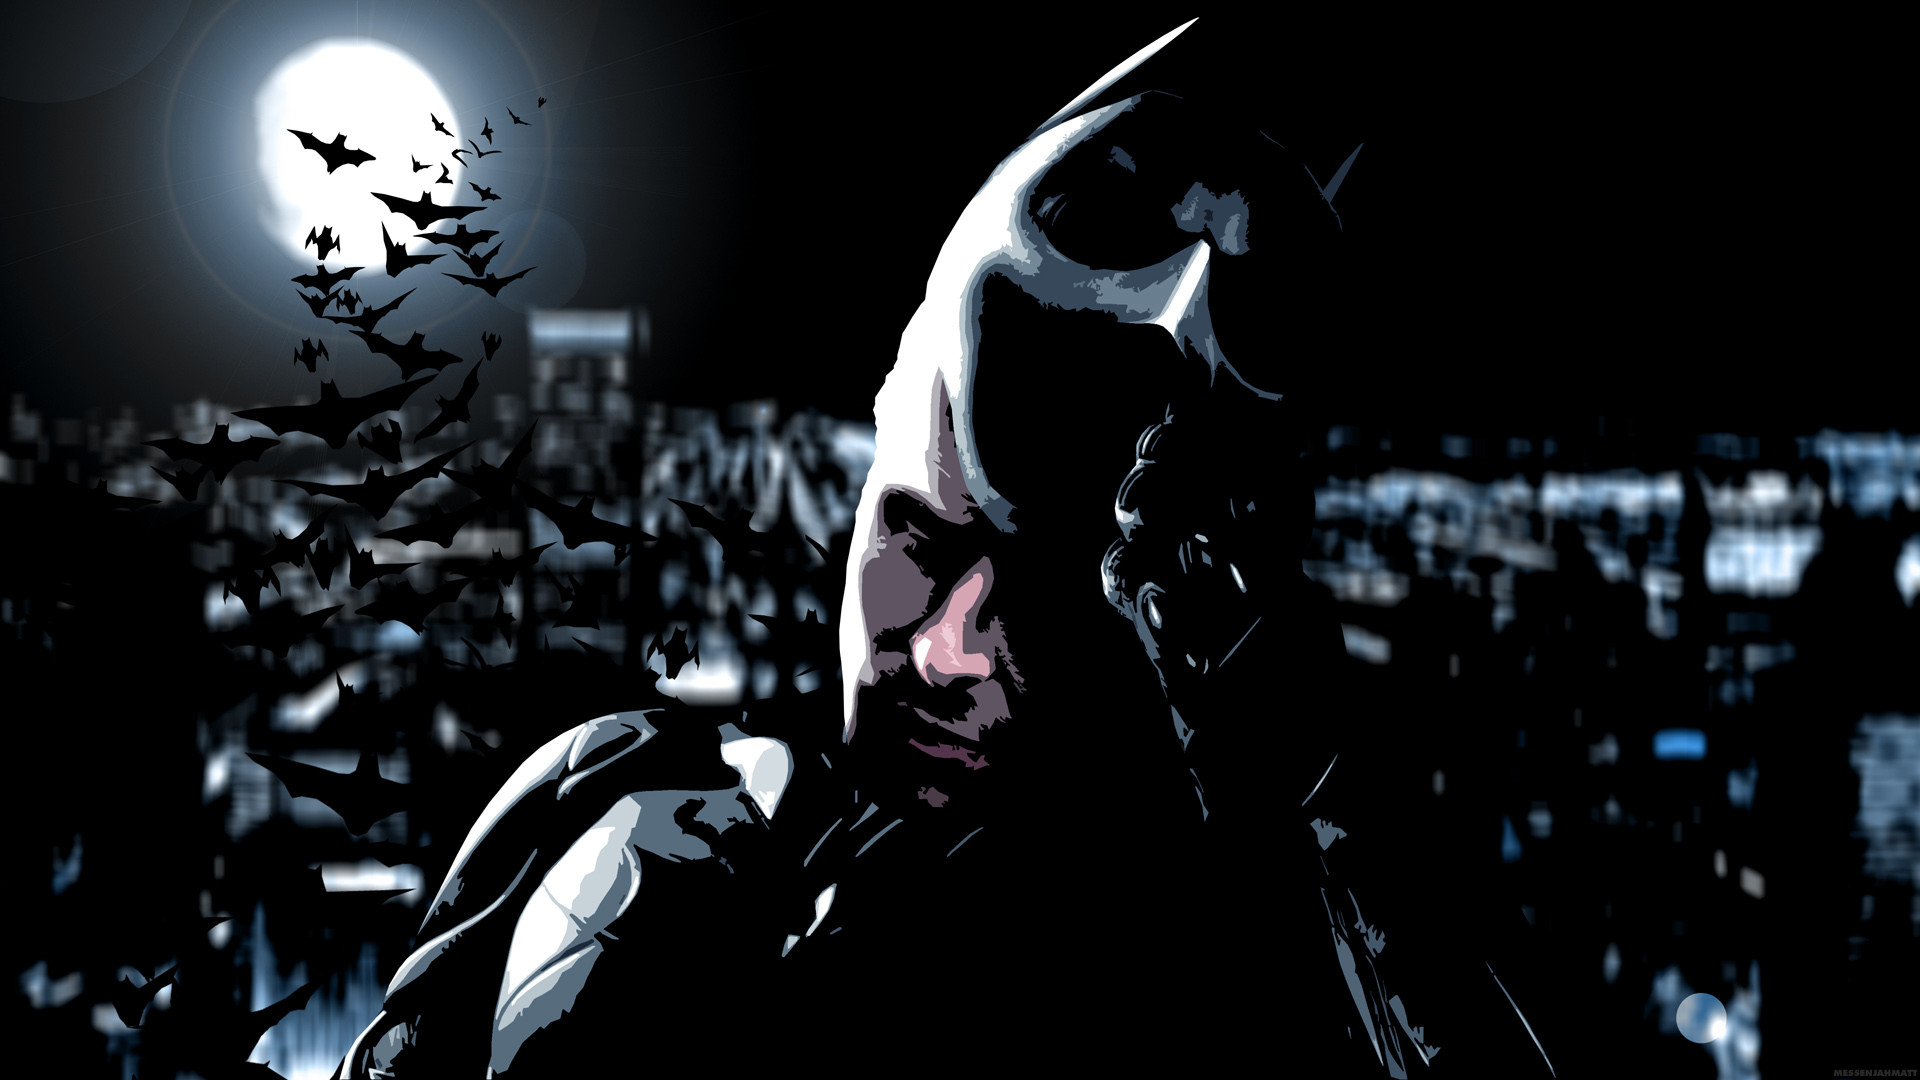 1920x1080 DC Comics Wallpapers, 45 DC Comics Gallery of Pictures, T4 .